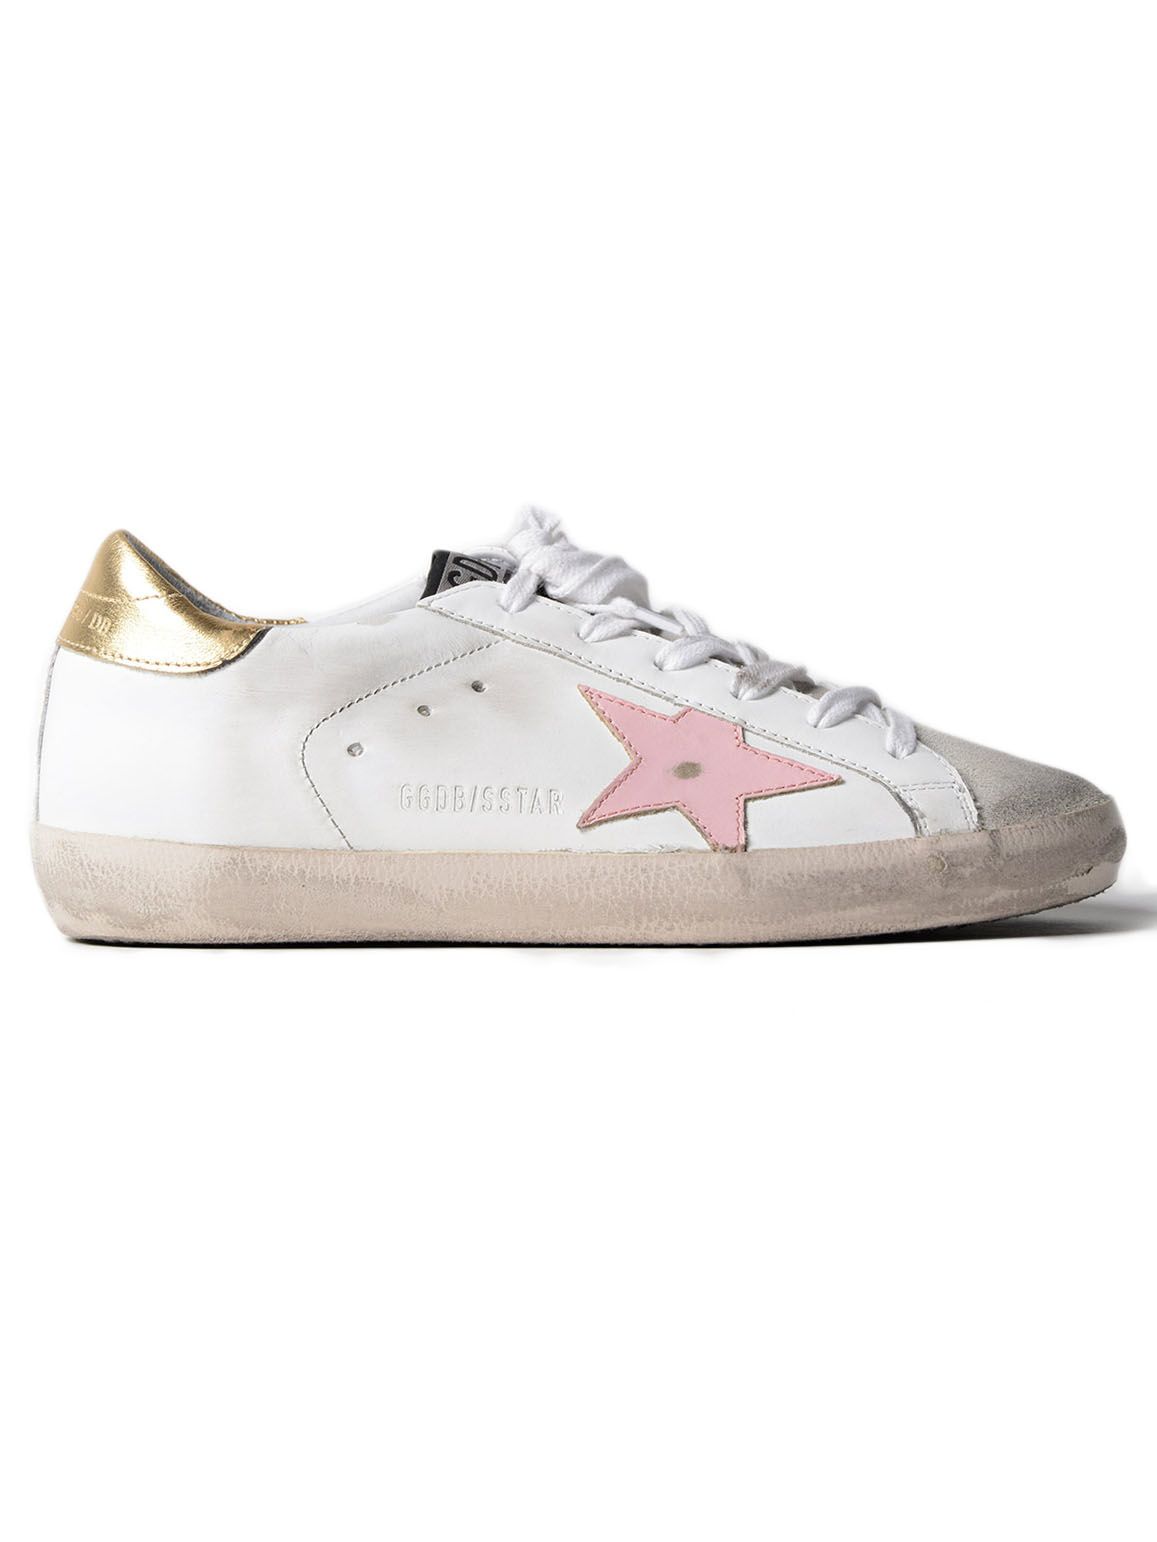 Cheap Adidas Superstar Foundation White Shoes at PacSun